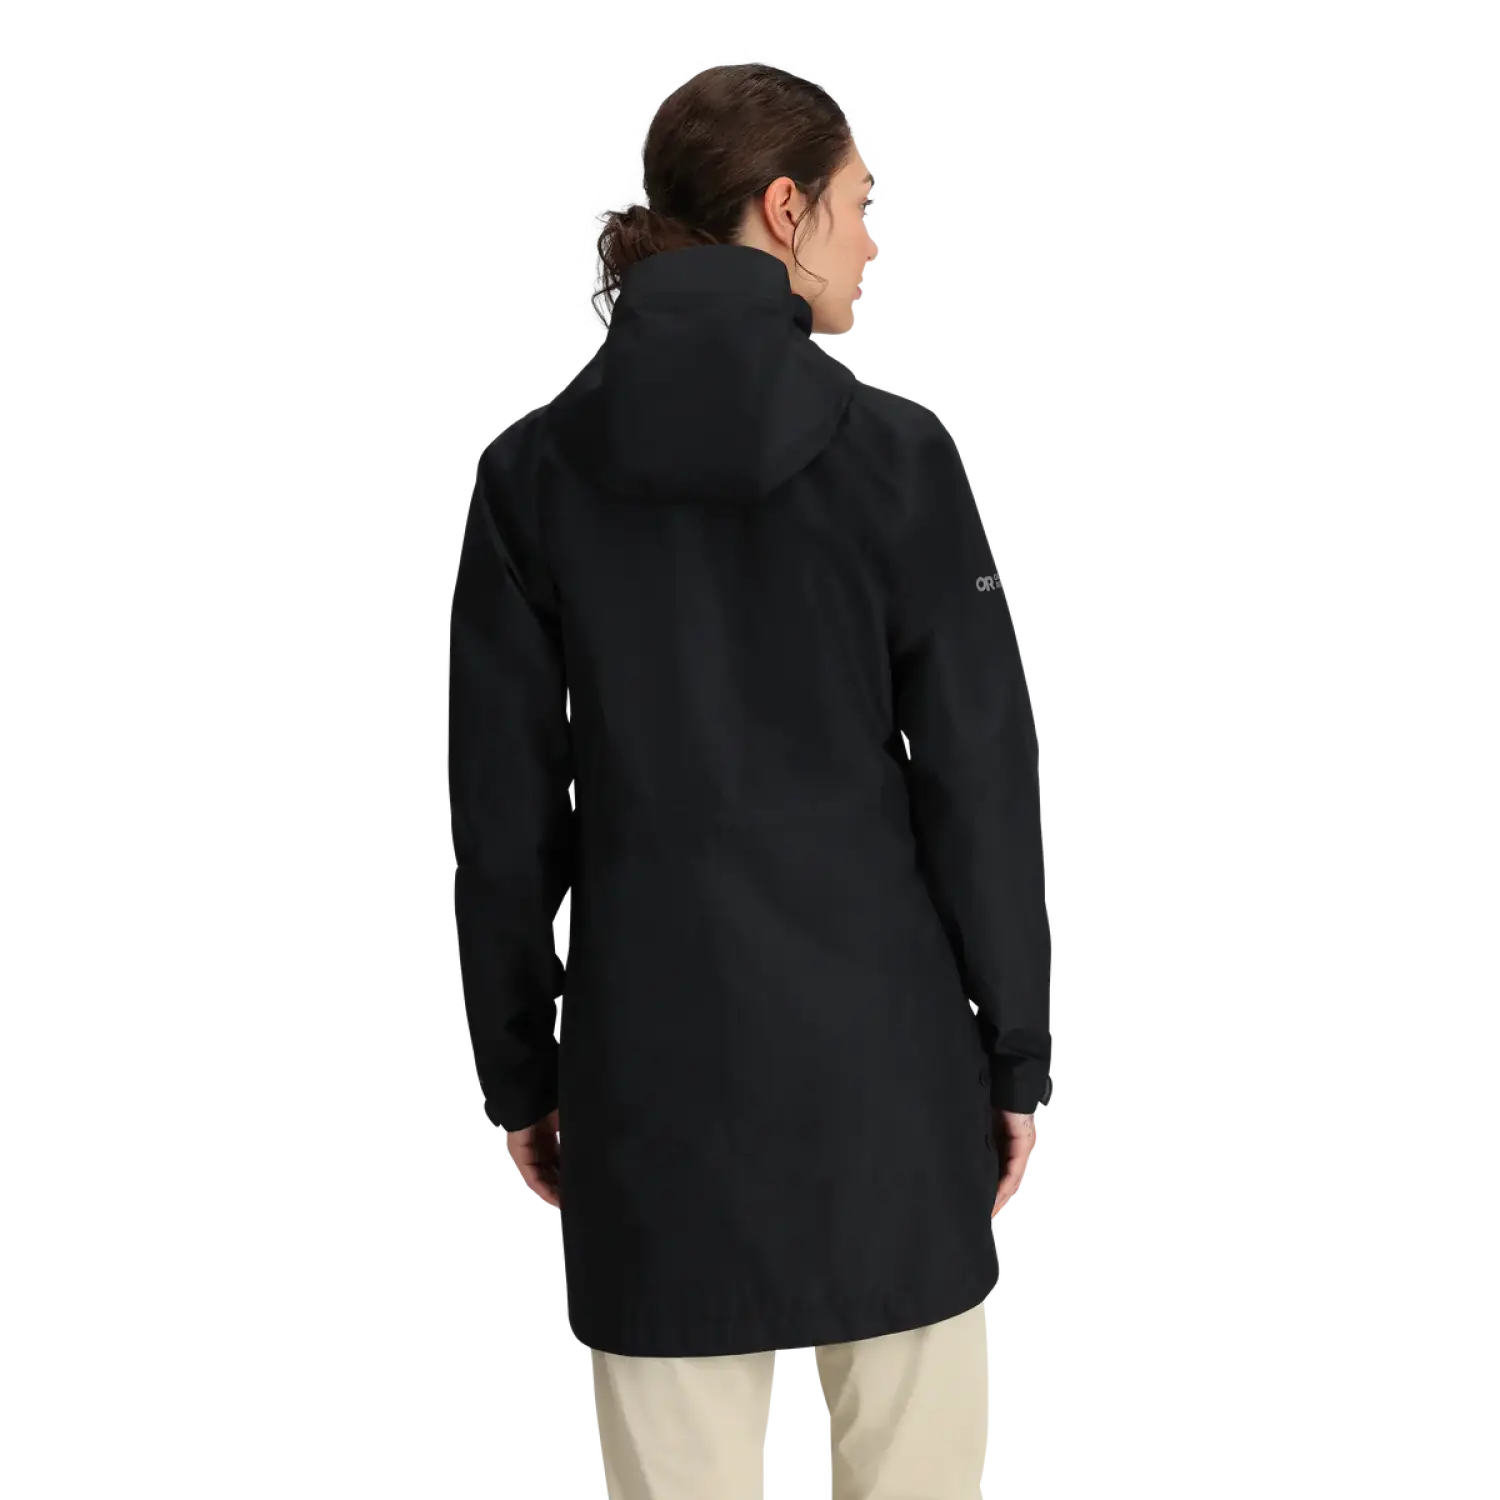 Outdoor Research Women's Aspire GORE-TEX® Trench shown in the Black color option. Back view.